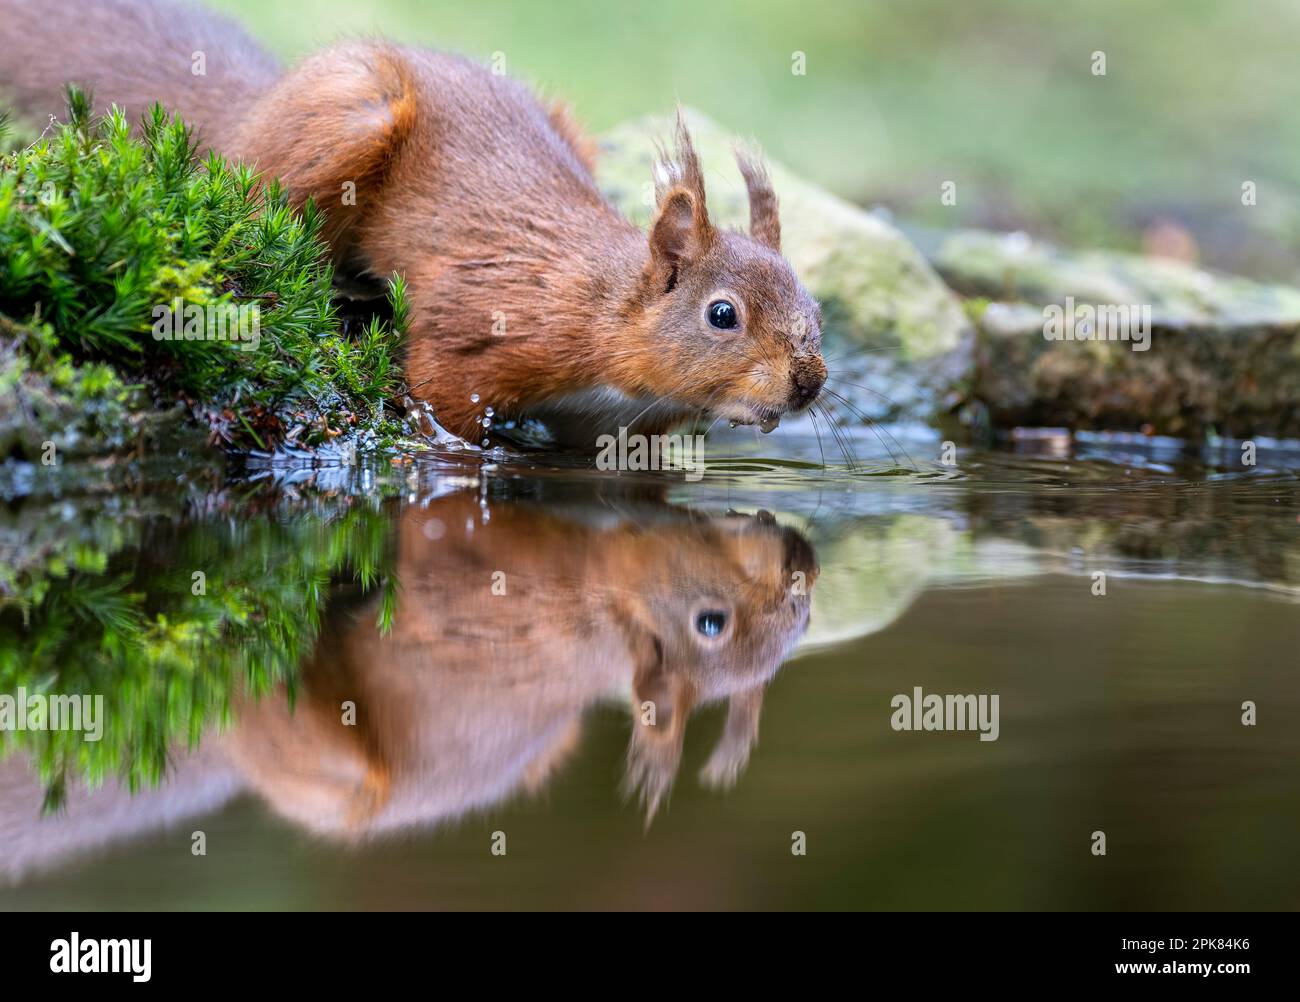 A British Red Squirrel, (Sciurus vulgaris), looking into a pool of water, (with reflection) Stock Photo